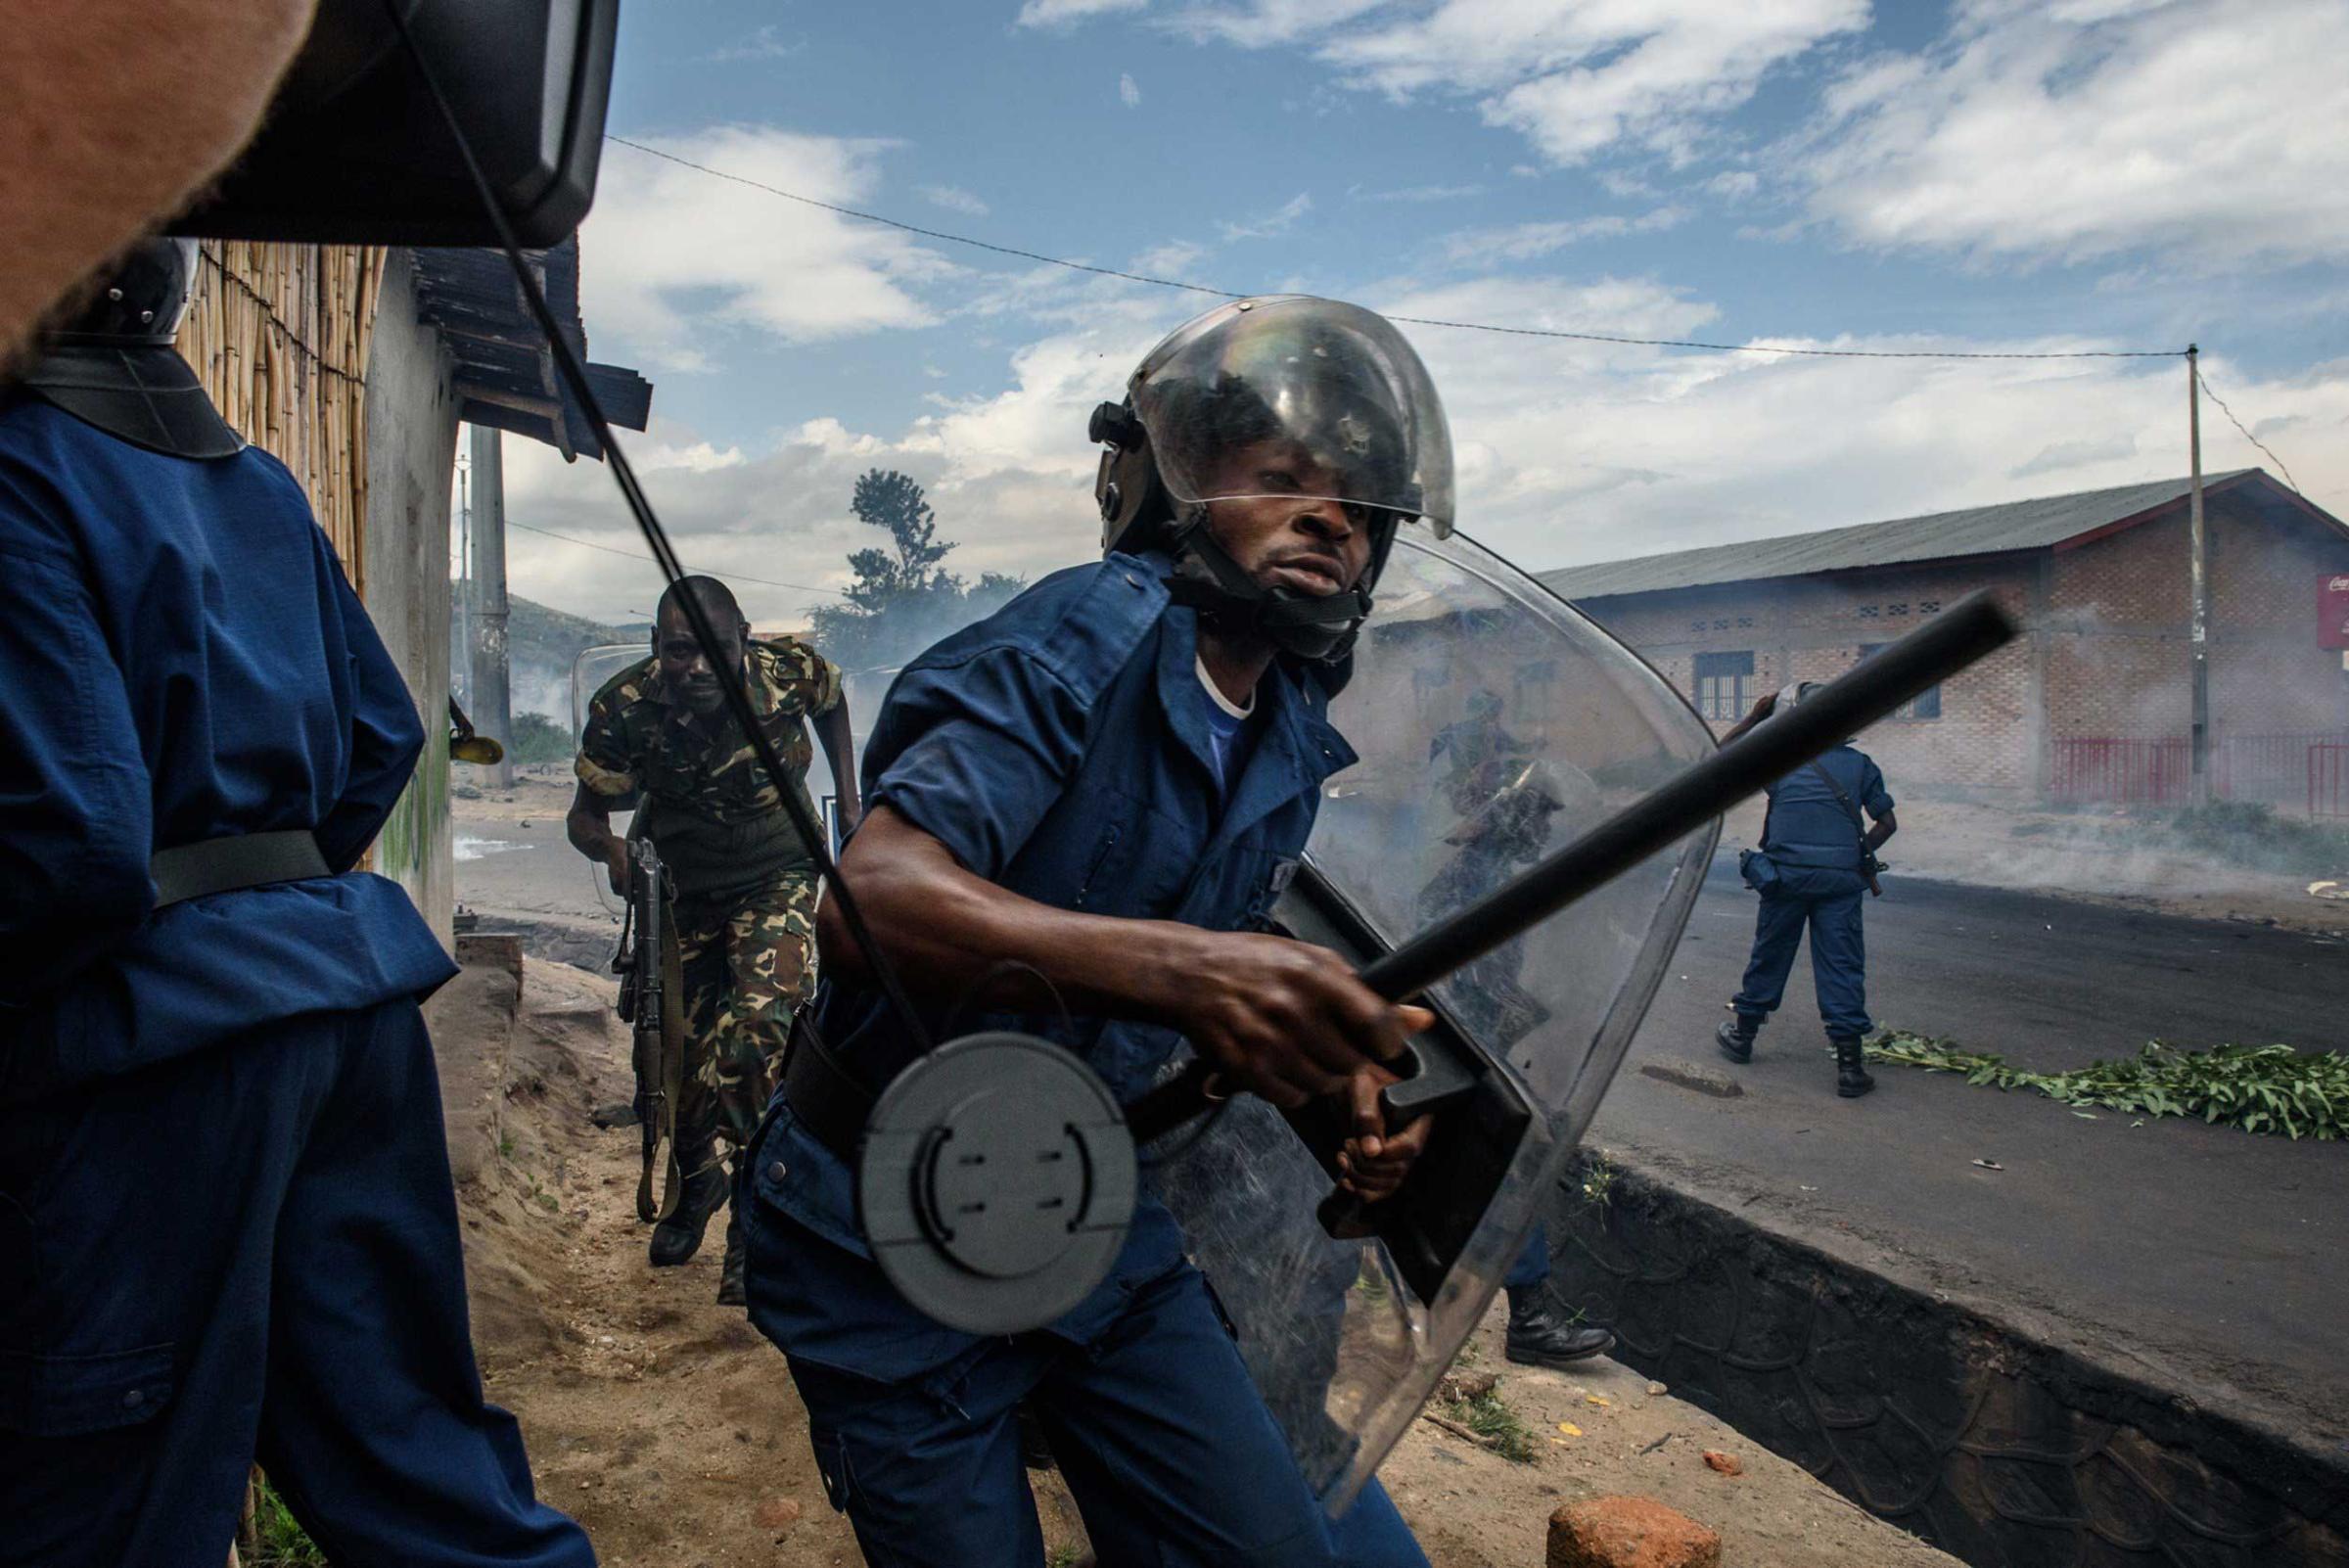 A police officer holding a baton and army forces run after protestors throwing stones during a demonstration against incumbent president Pierre Nkurunziza's bid for a third term in Bujumbura on May 13, 2015.